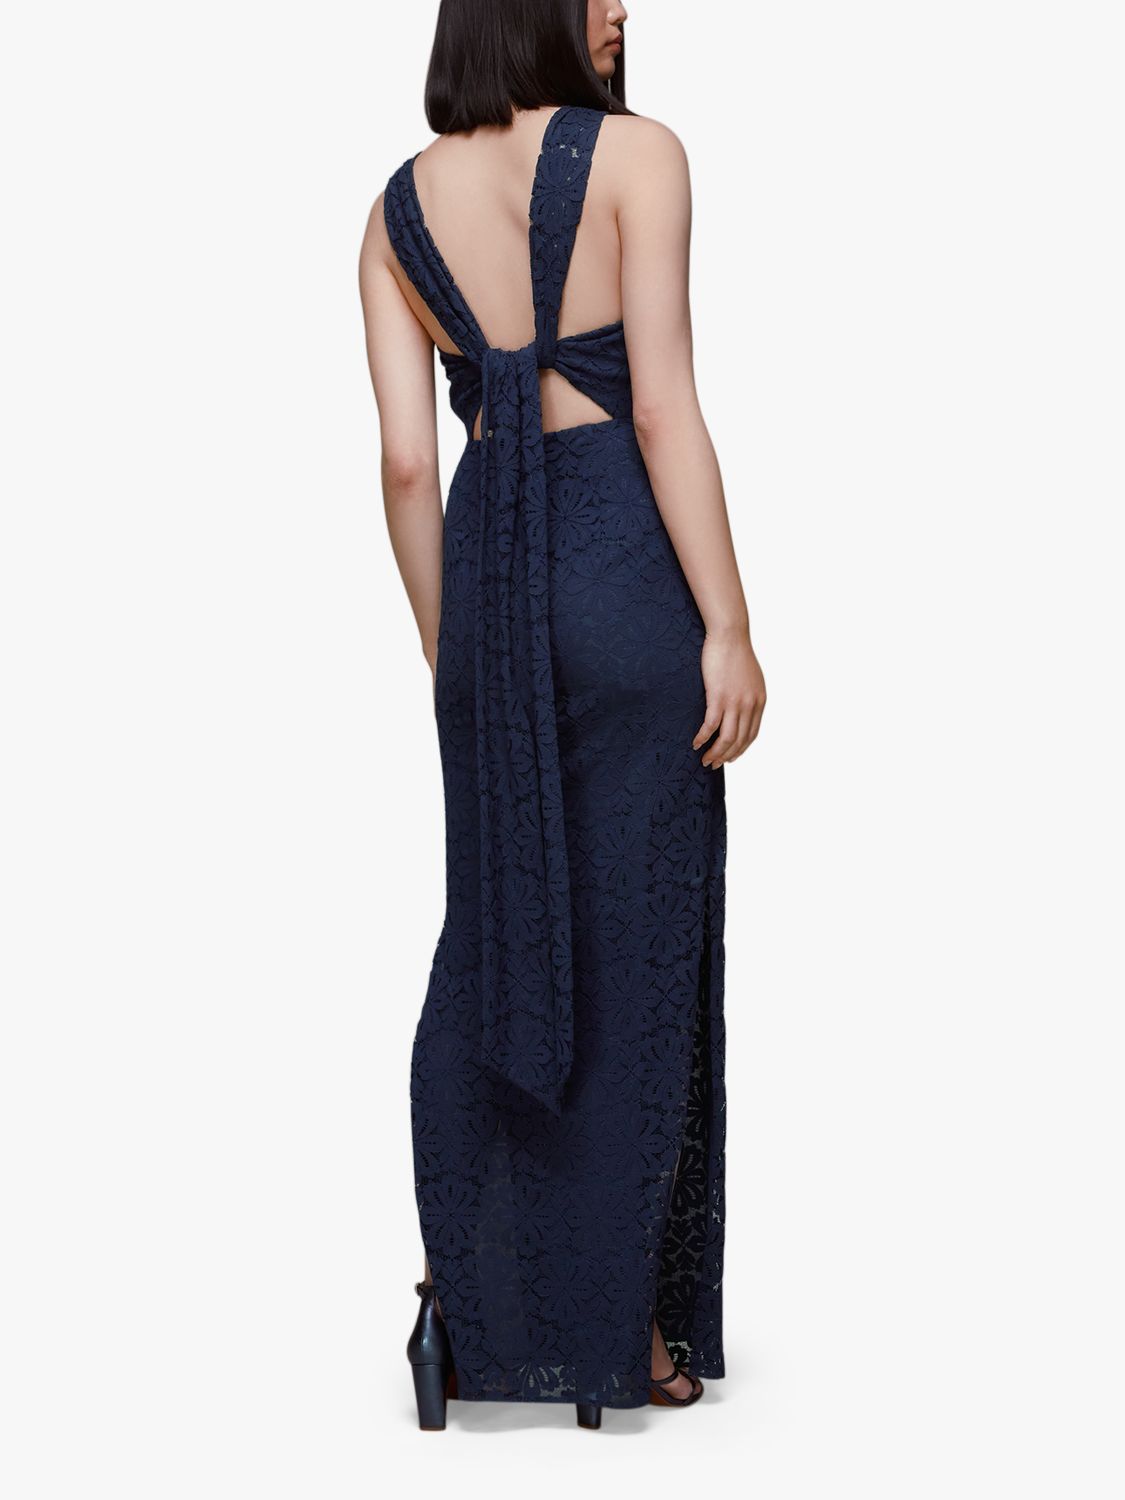 Whistles  Lace Tie Back Maxi Dress, Navy, 6